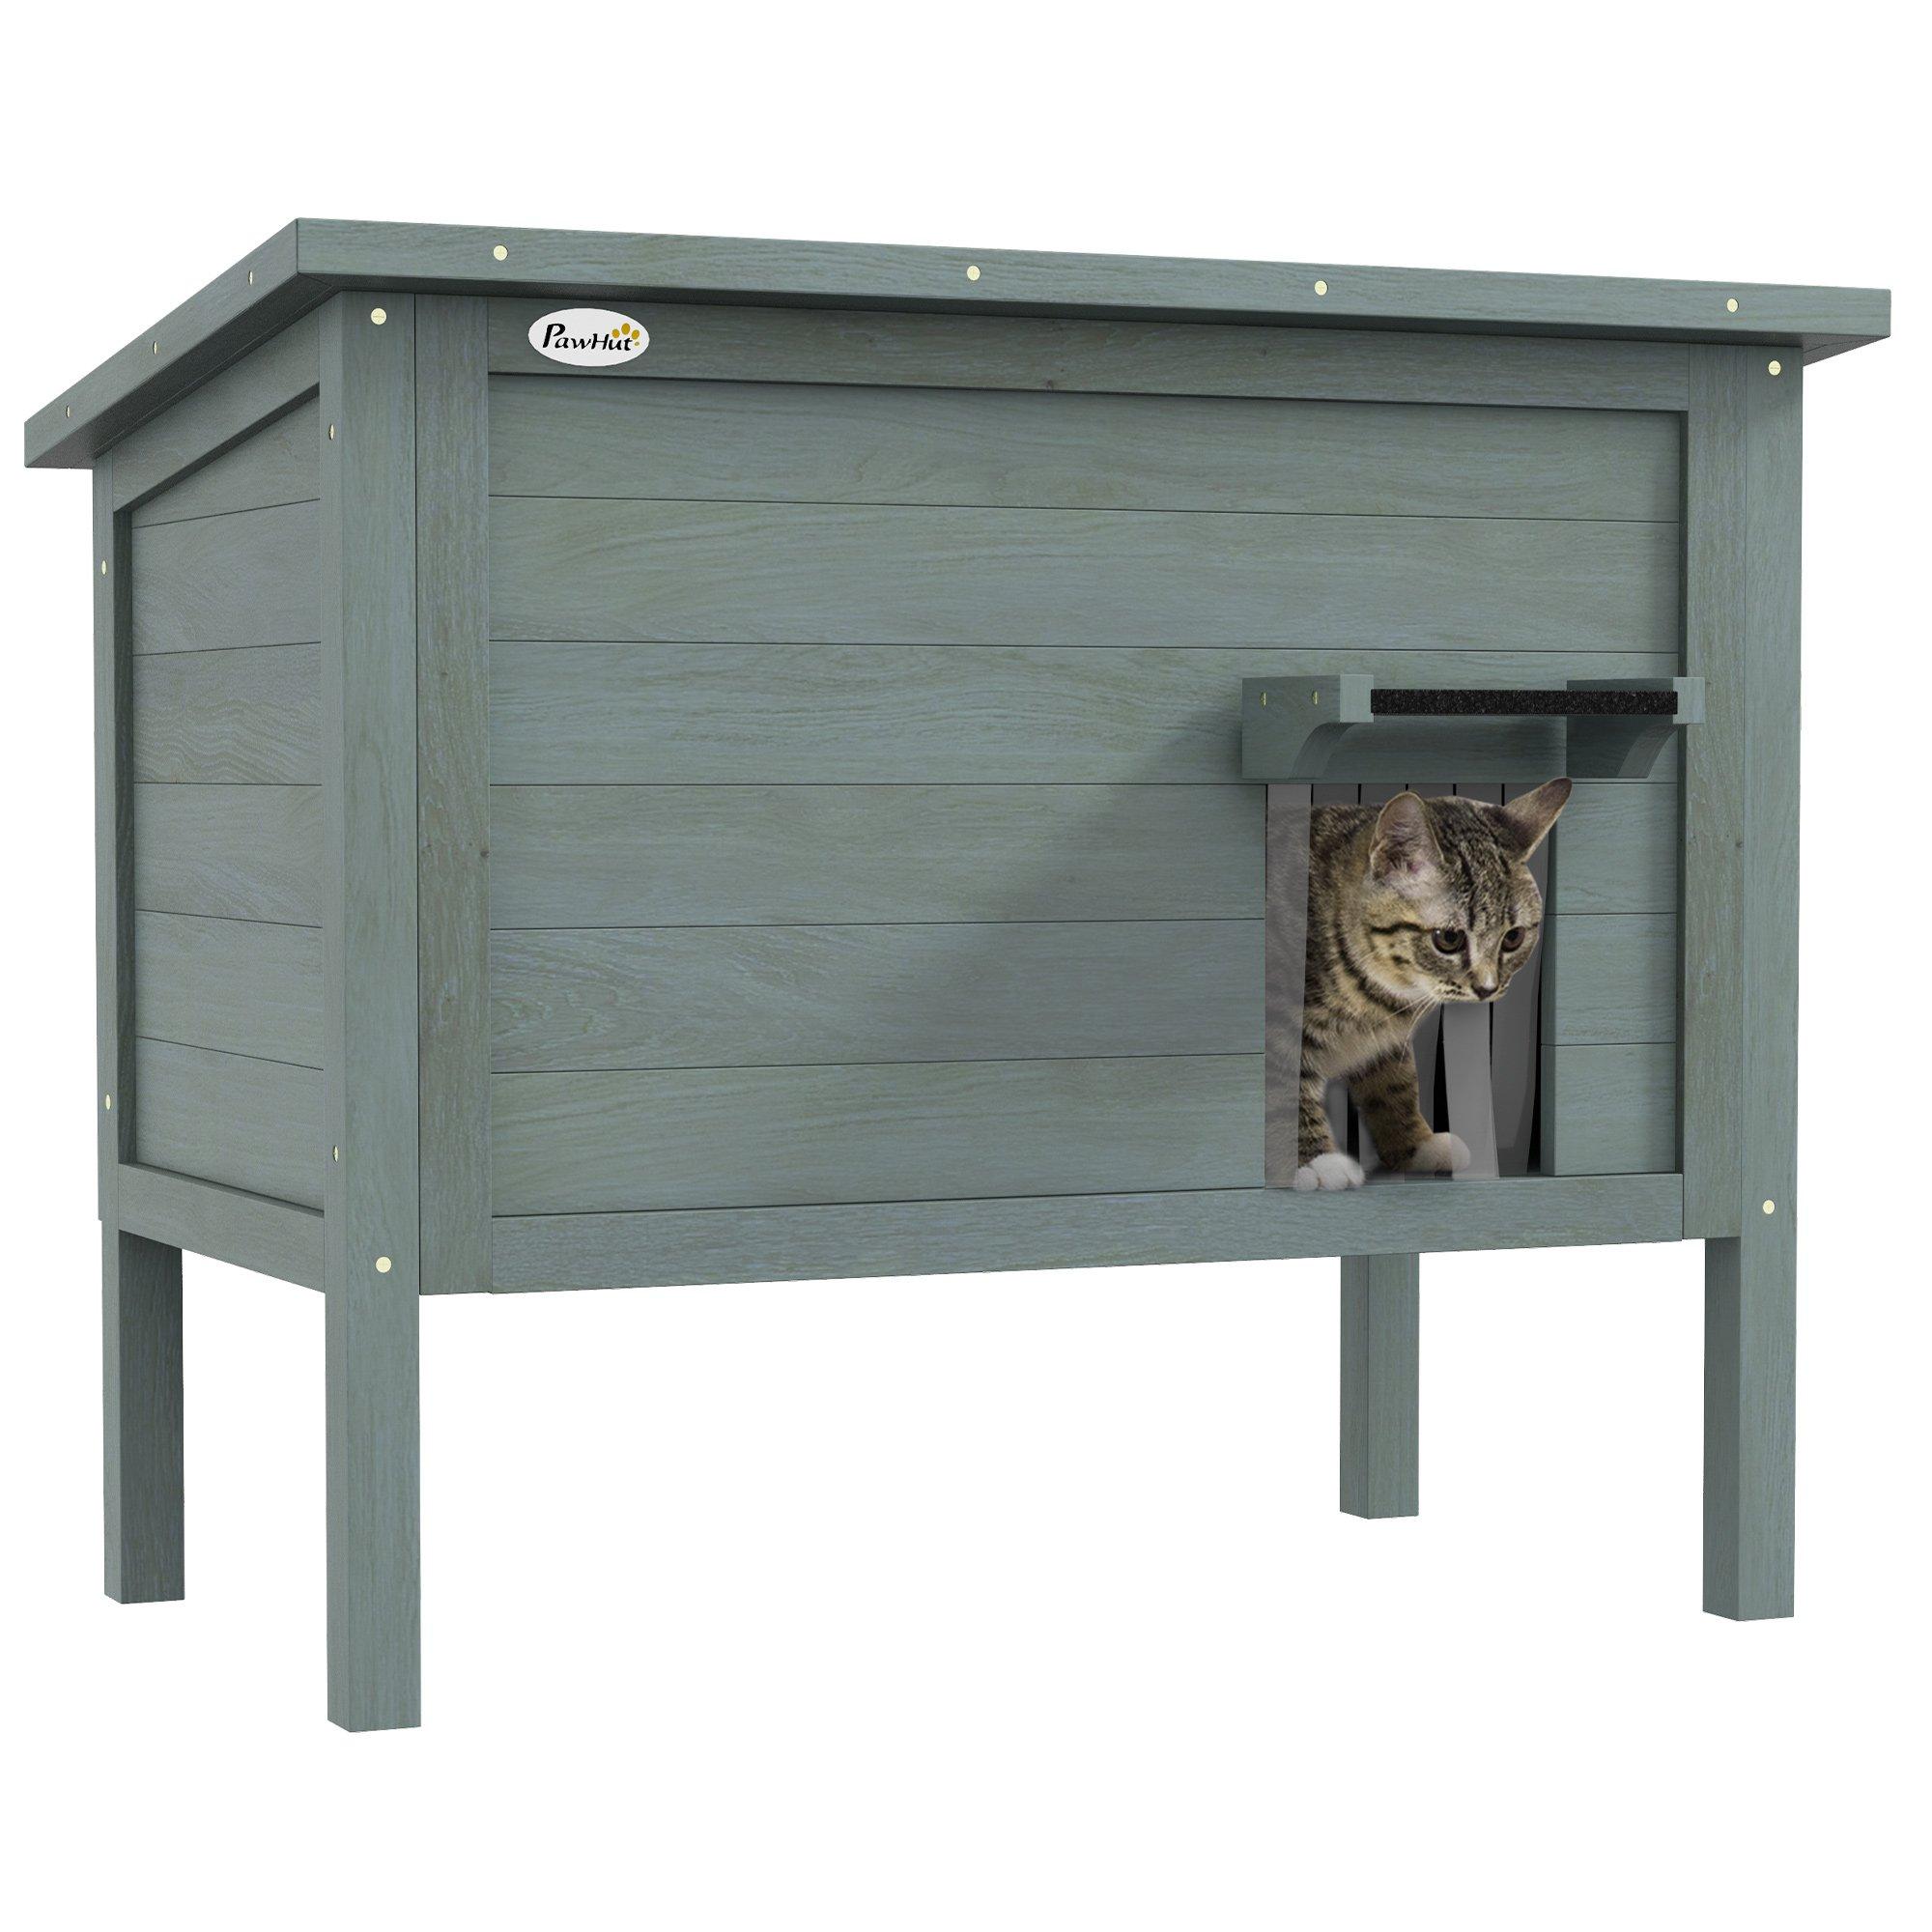 Cat House Outdoor Feral Cat House Insulated with Removable Floor - Charcoal Grey